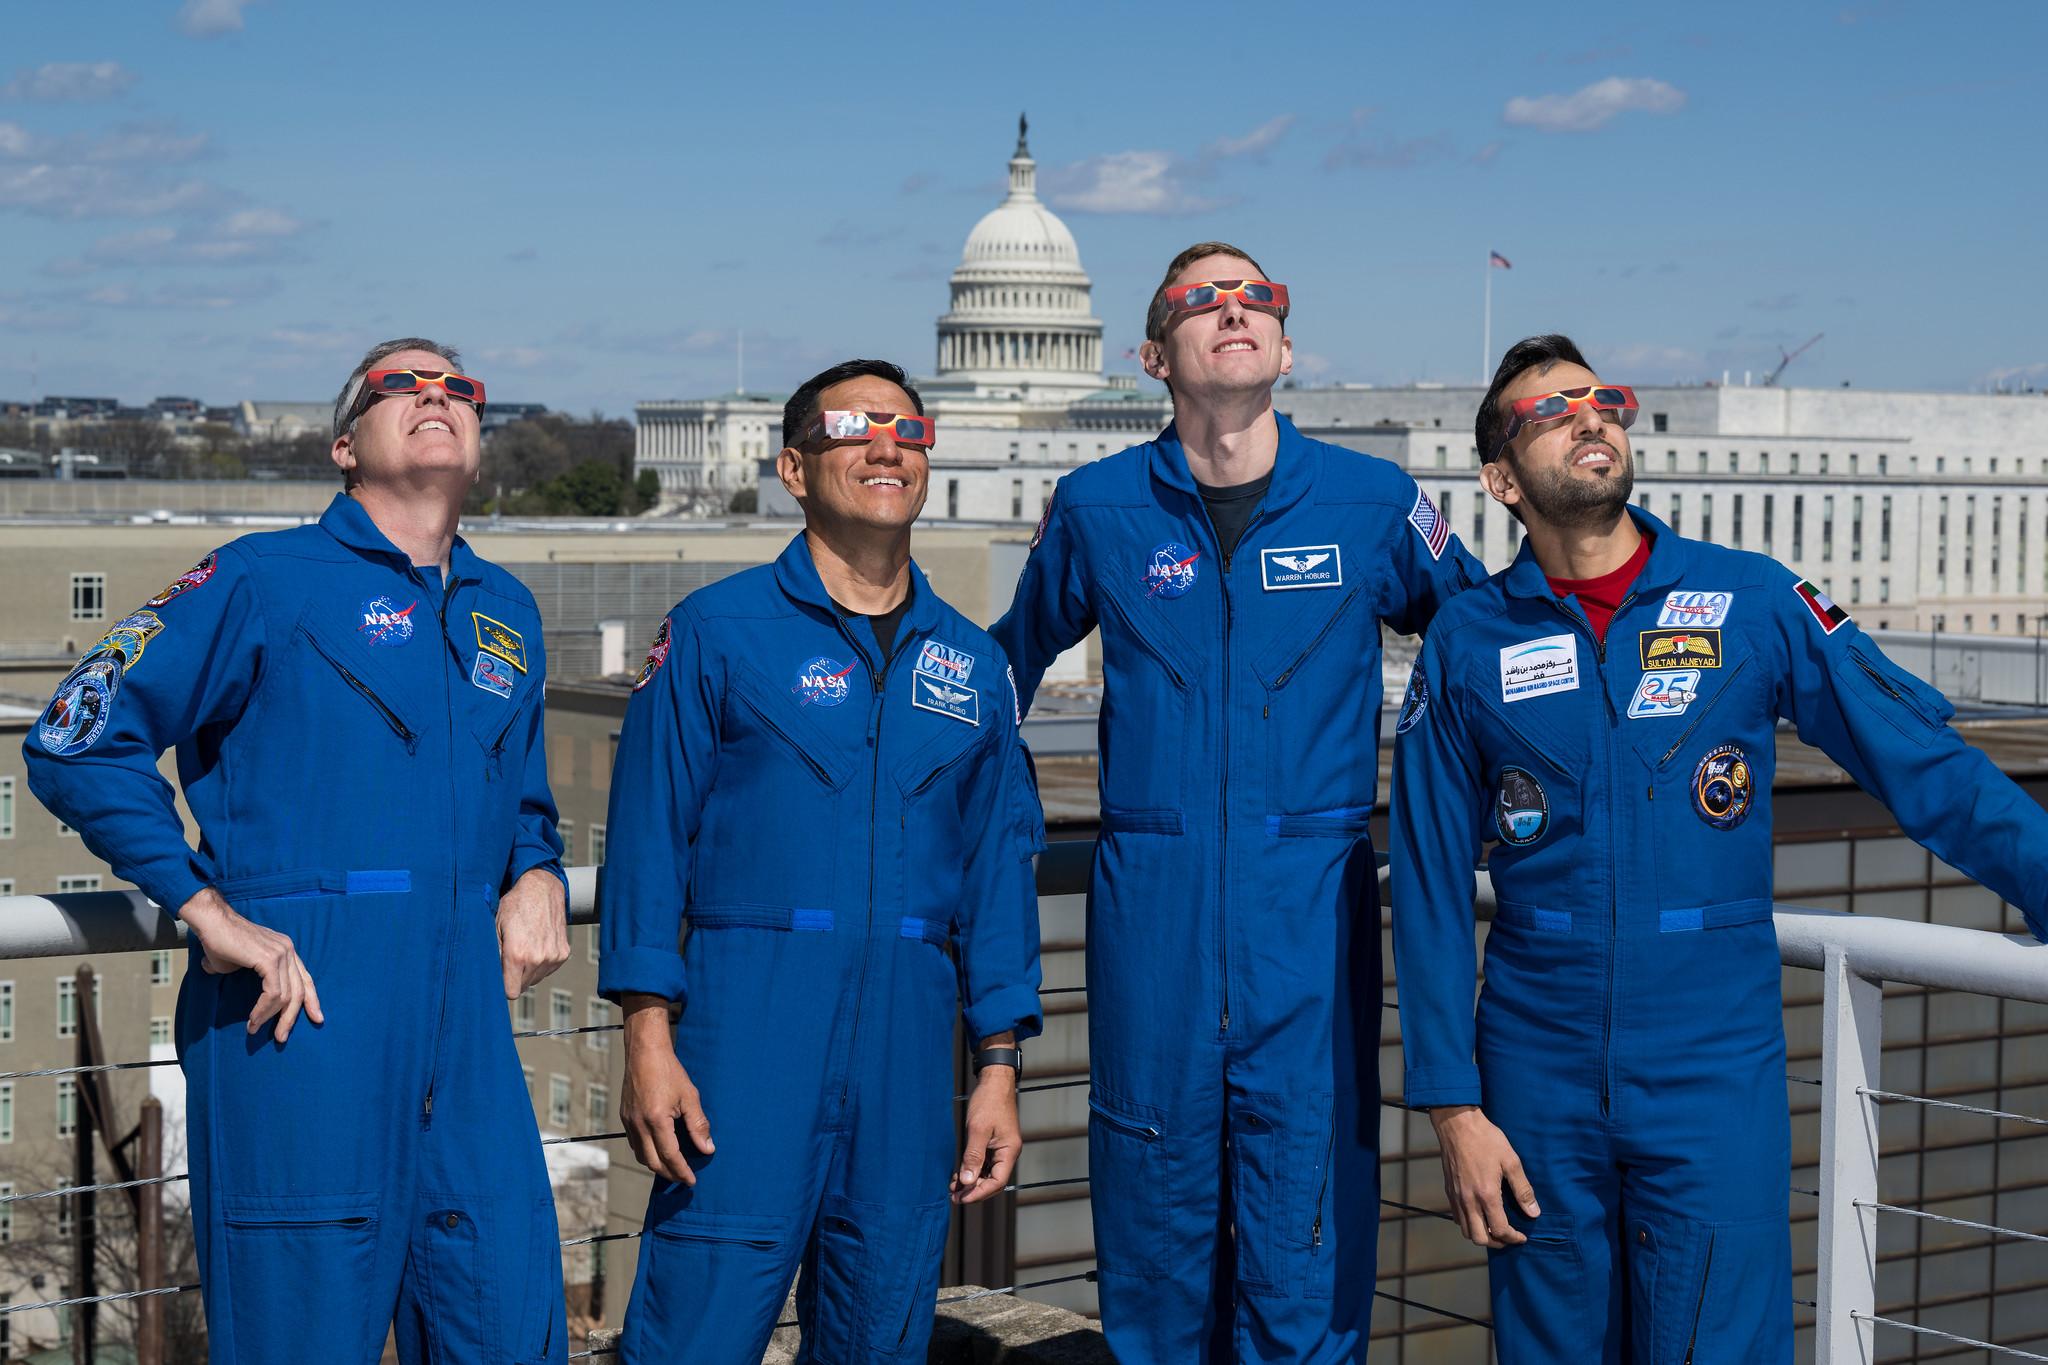 NASA's ready for the Great American Eclipse, but you don't have to be an astronaut to contribute to solar research. (NASA / Aubrey Gemignani)